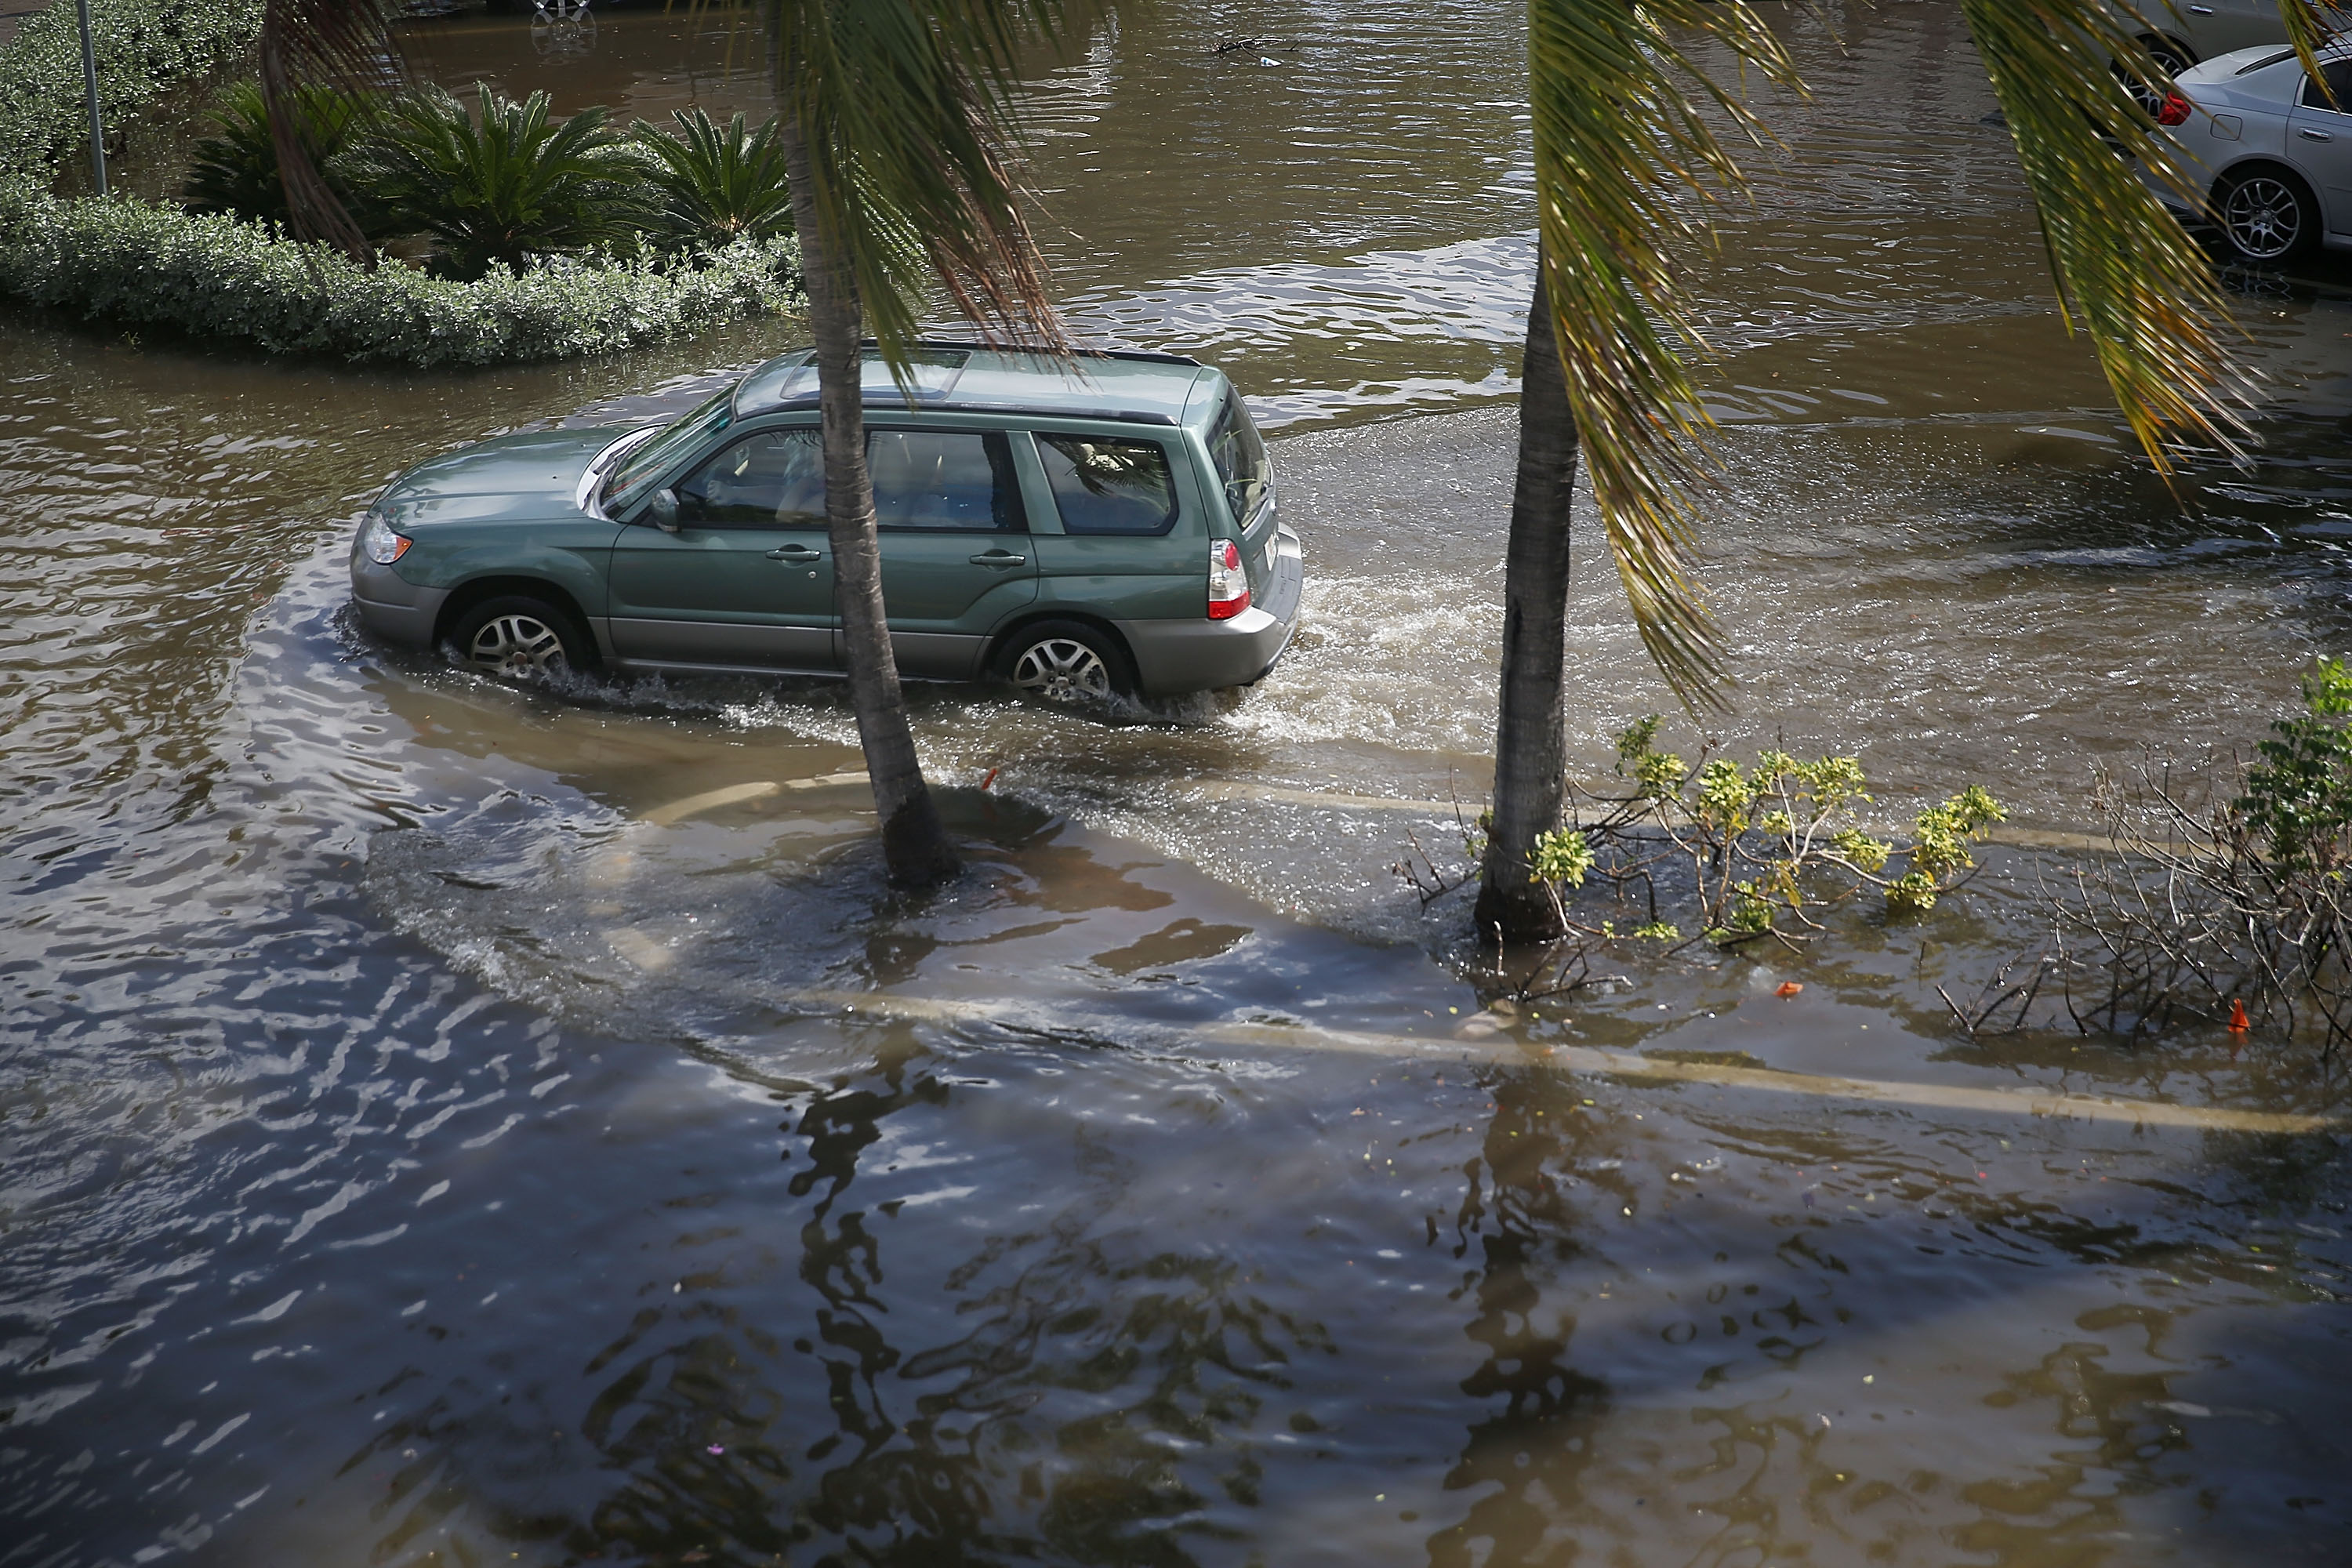 A vehicle drives through flooded streets caused by the combination of the lunar orbit, which caused seasonal high tides, and rising sea levels due to climate change on September 30, 2015 in Fort Lauderdale, Florida. (Joe Raedle—Getty Images)